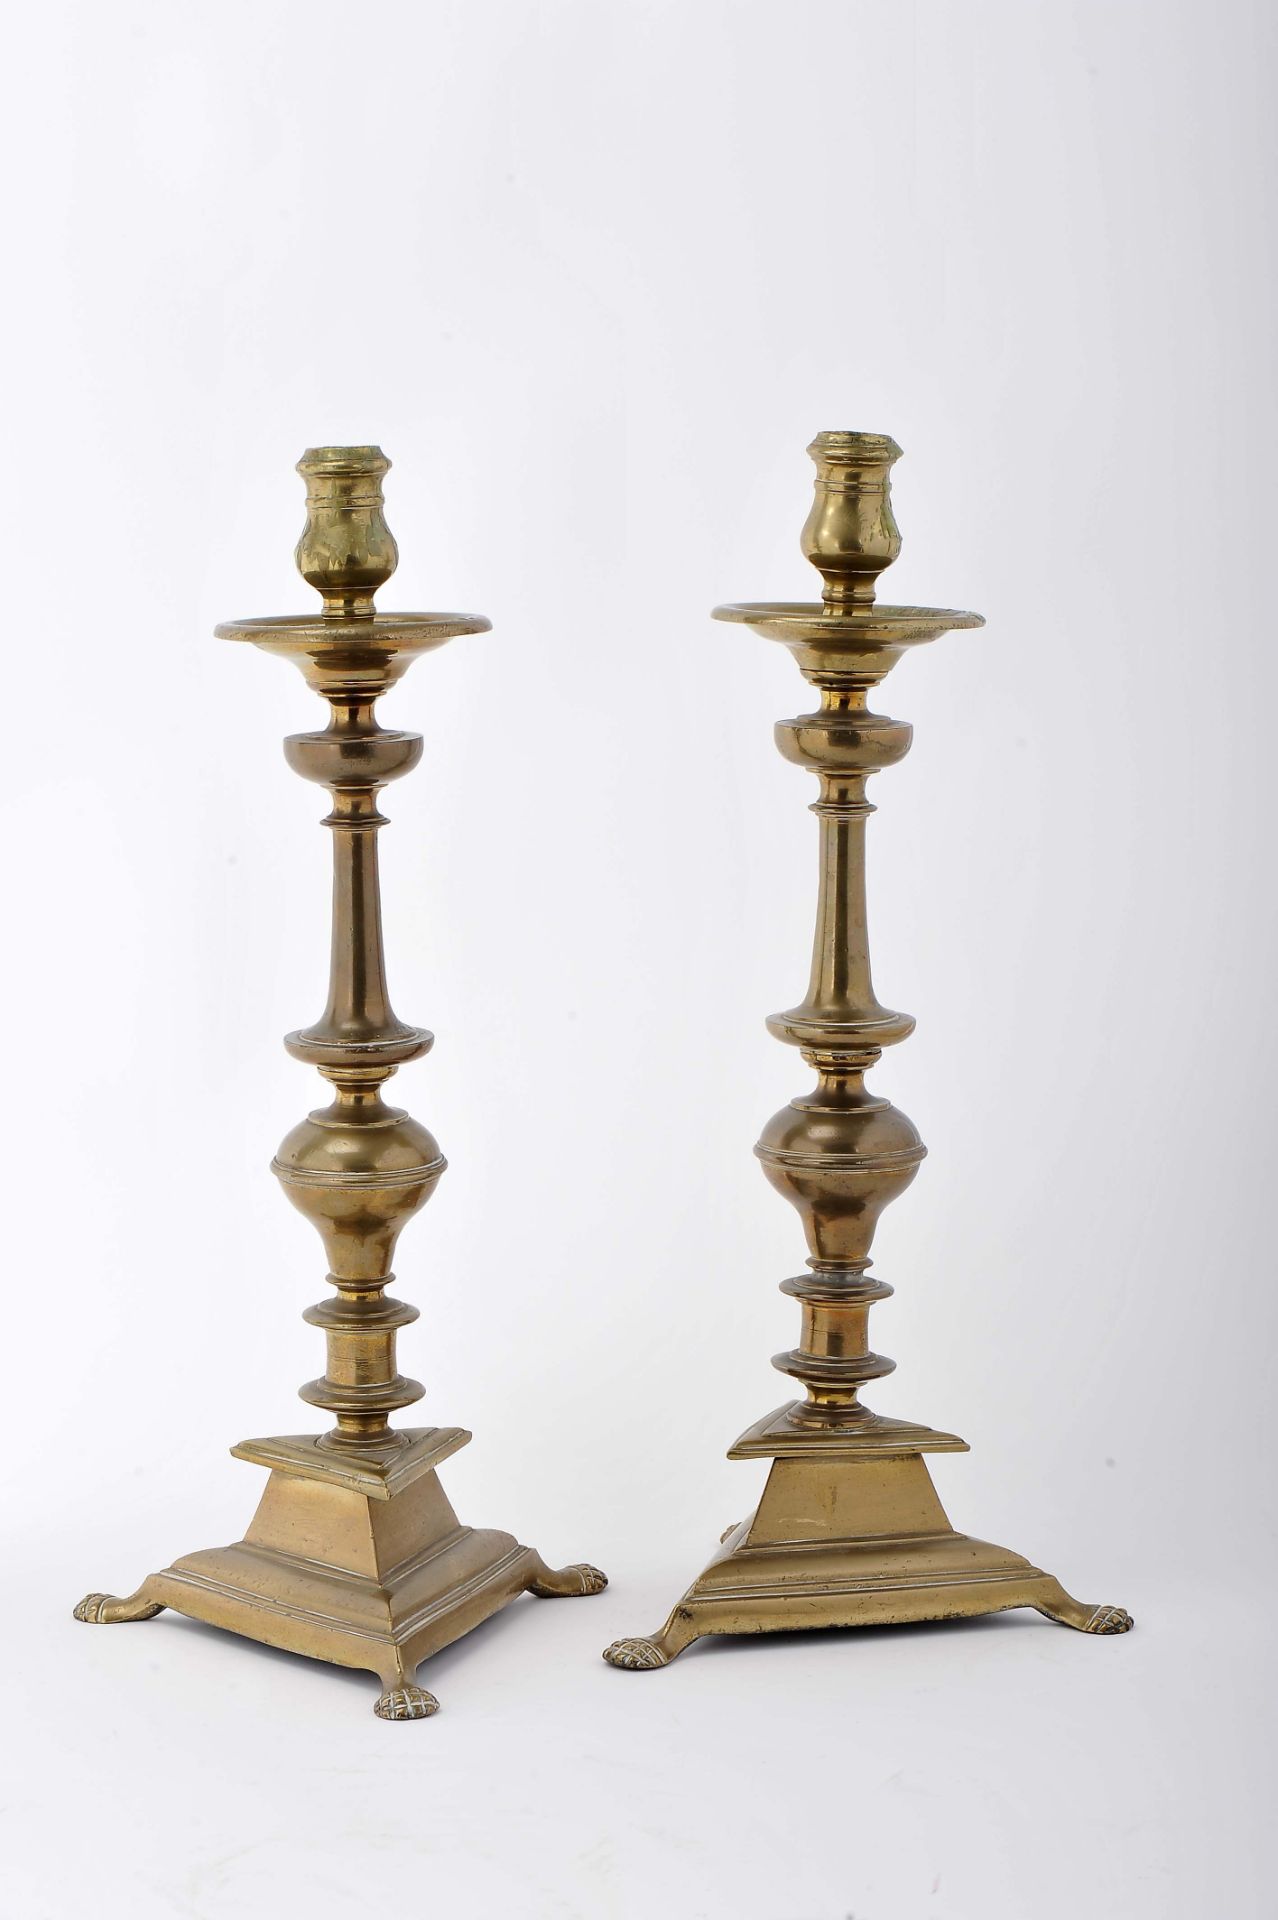 A pair of candlesticks with a triangle base